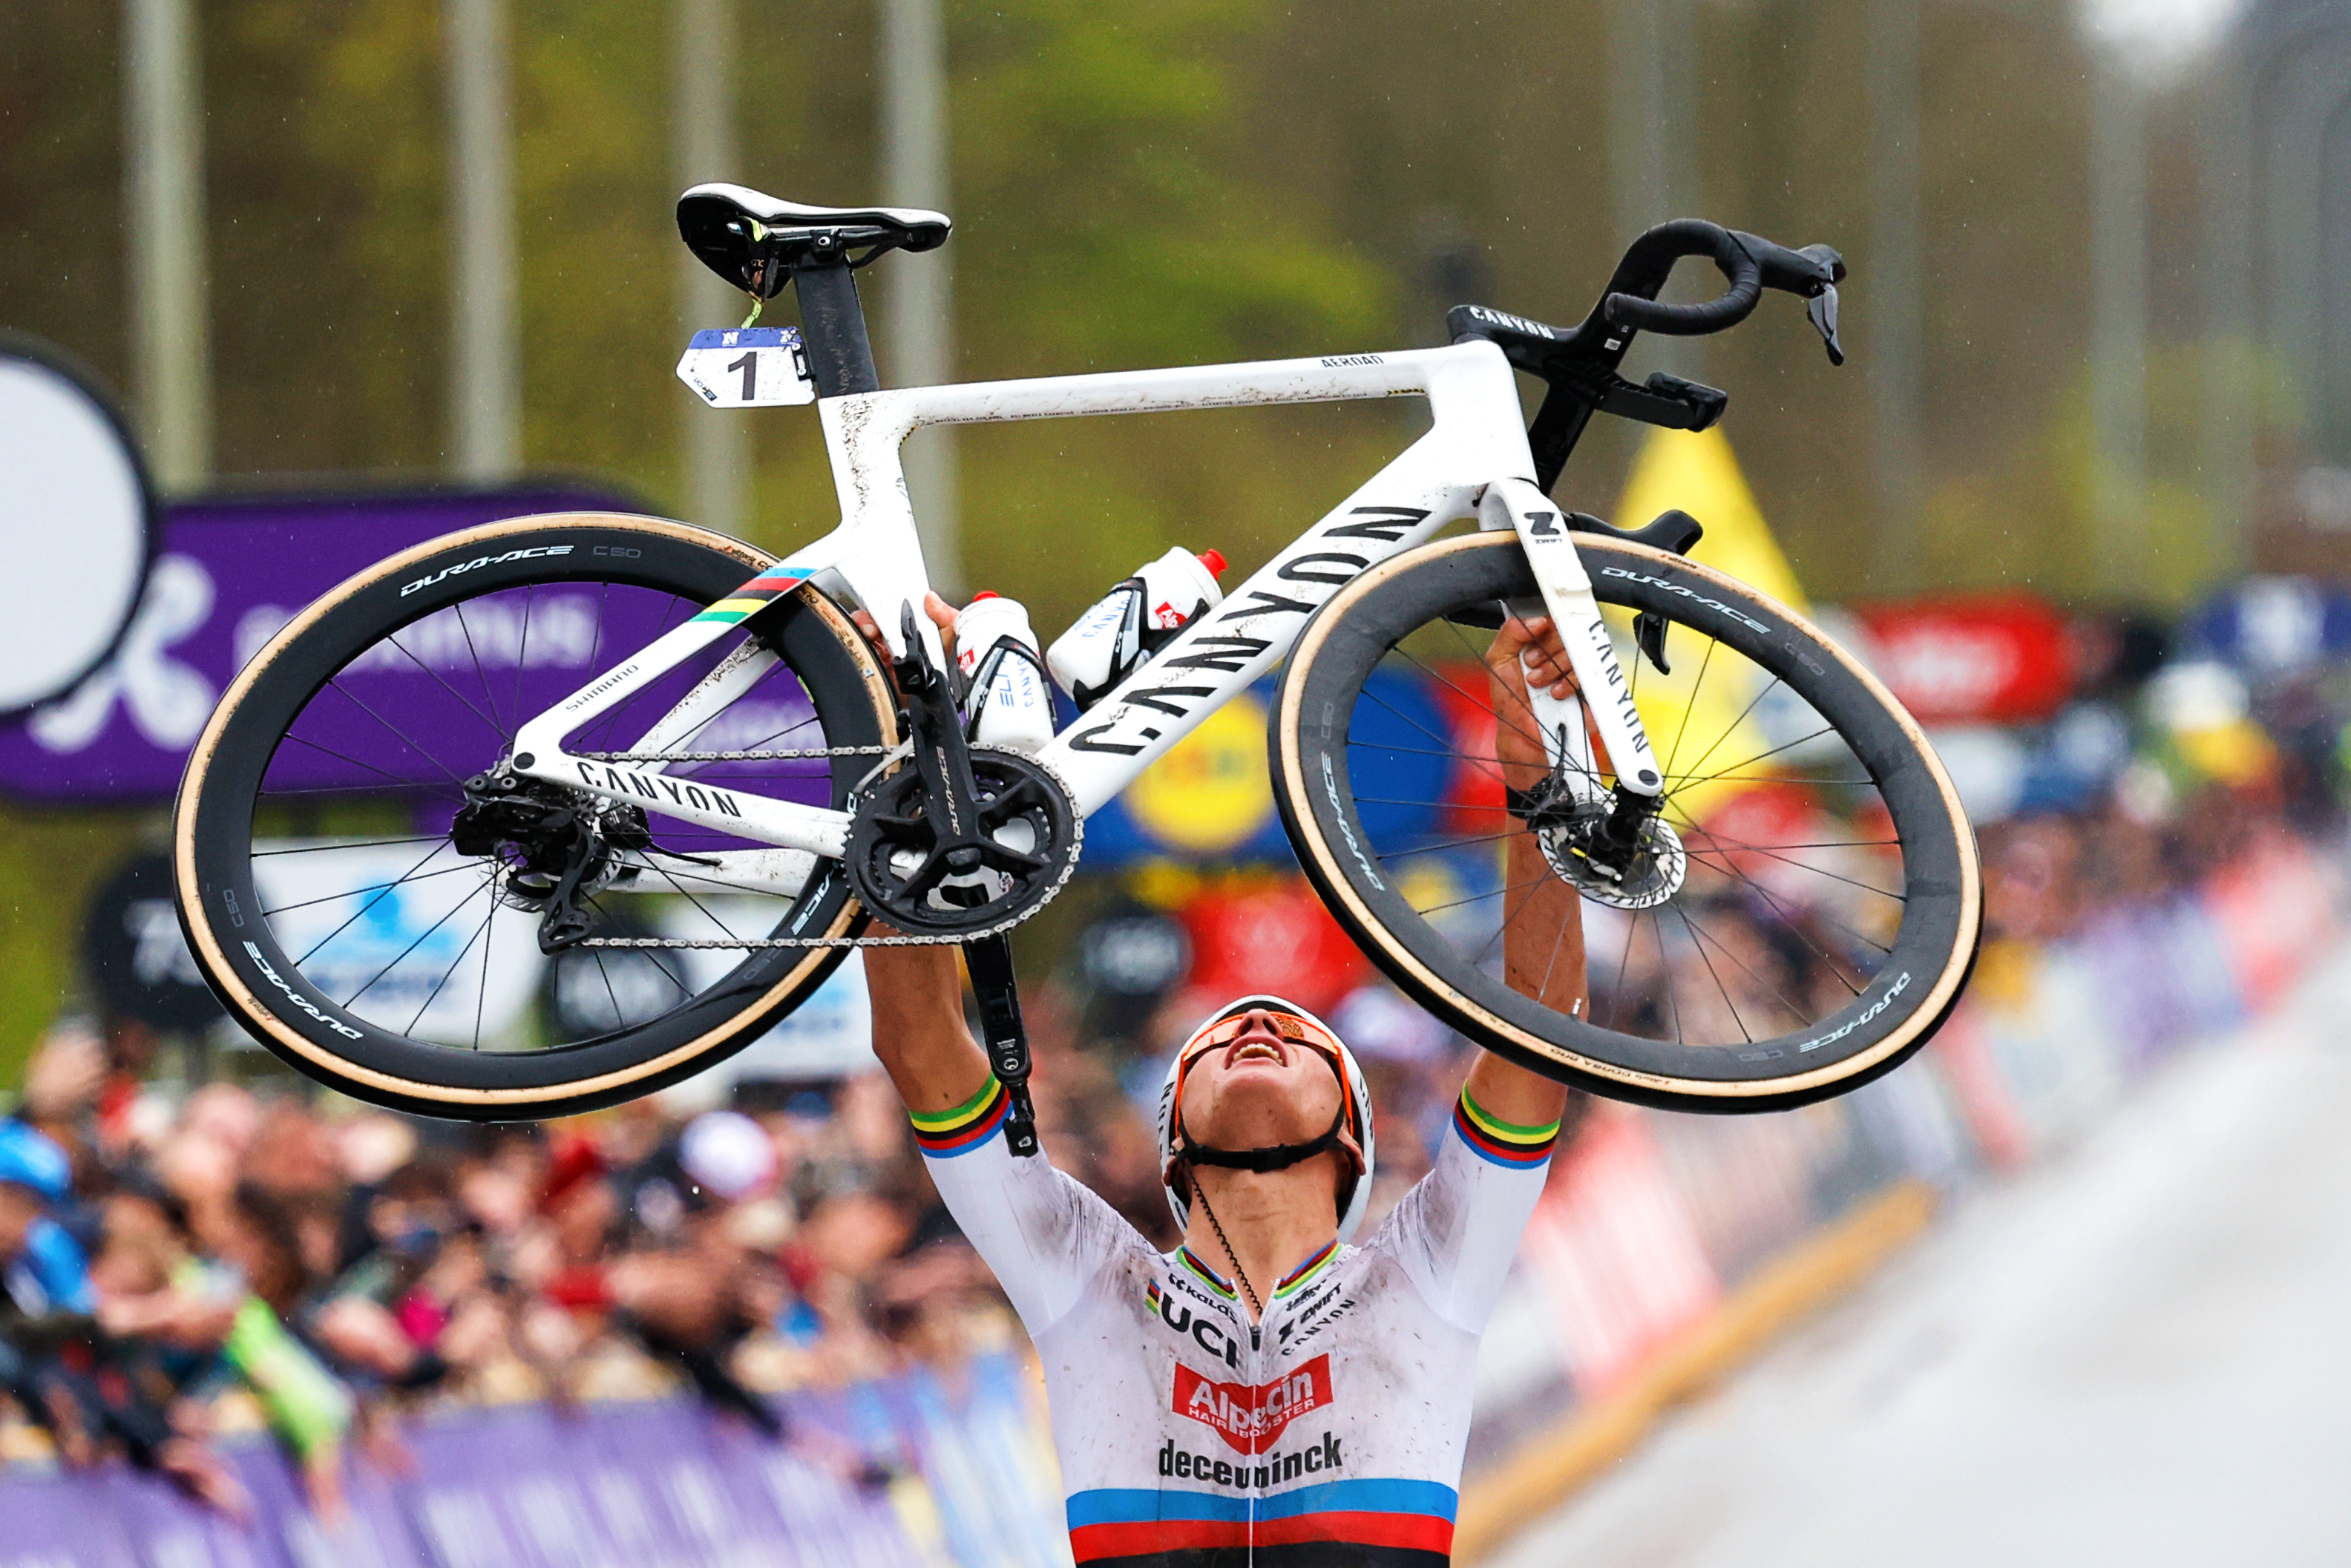 Mathieu van der Poel raises his bike in triumph at the finish of the Tour of Flanders